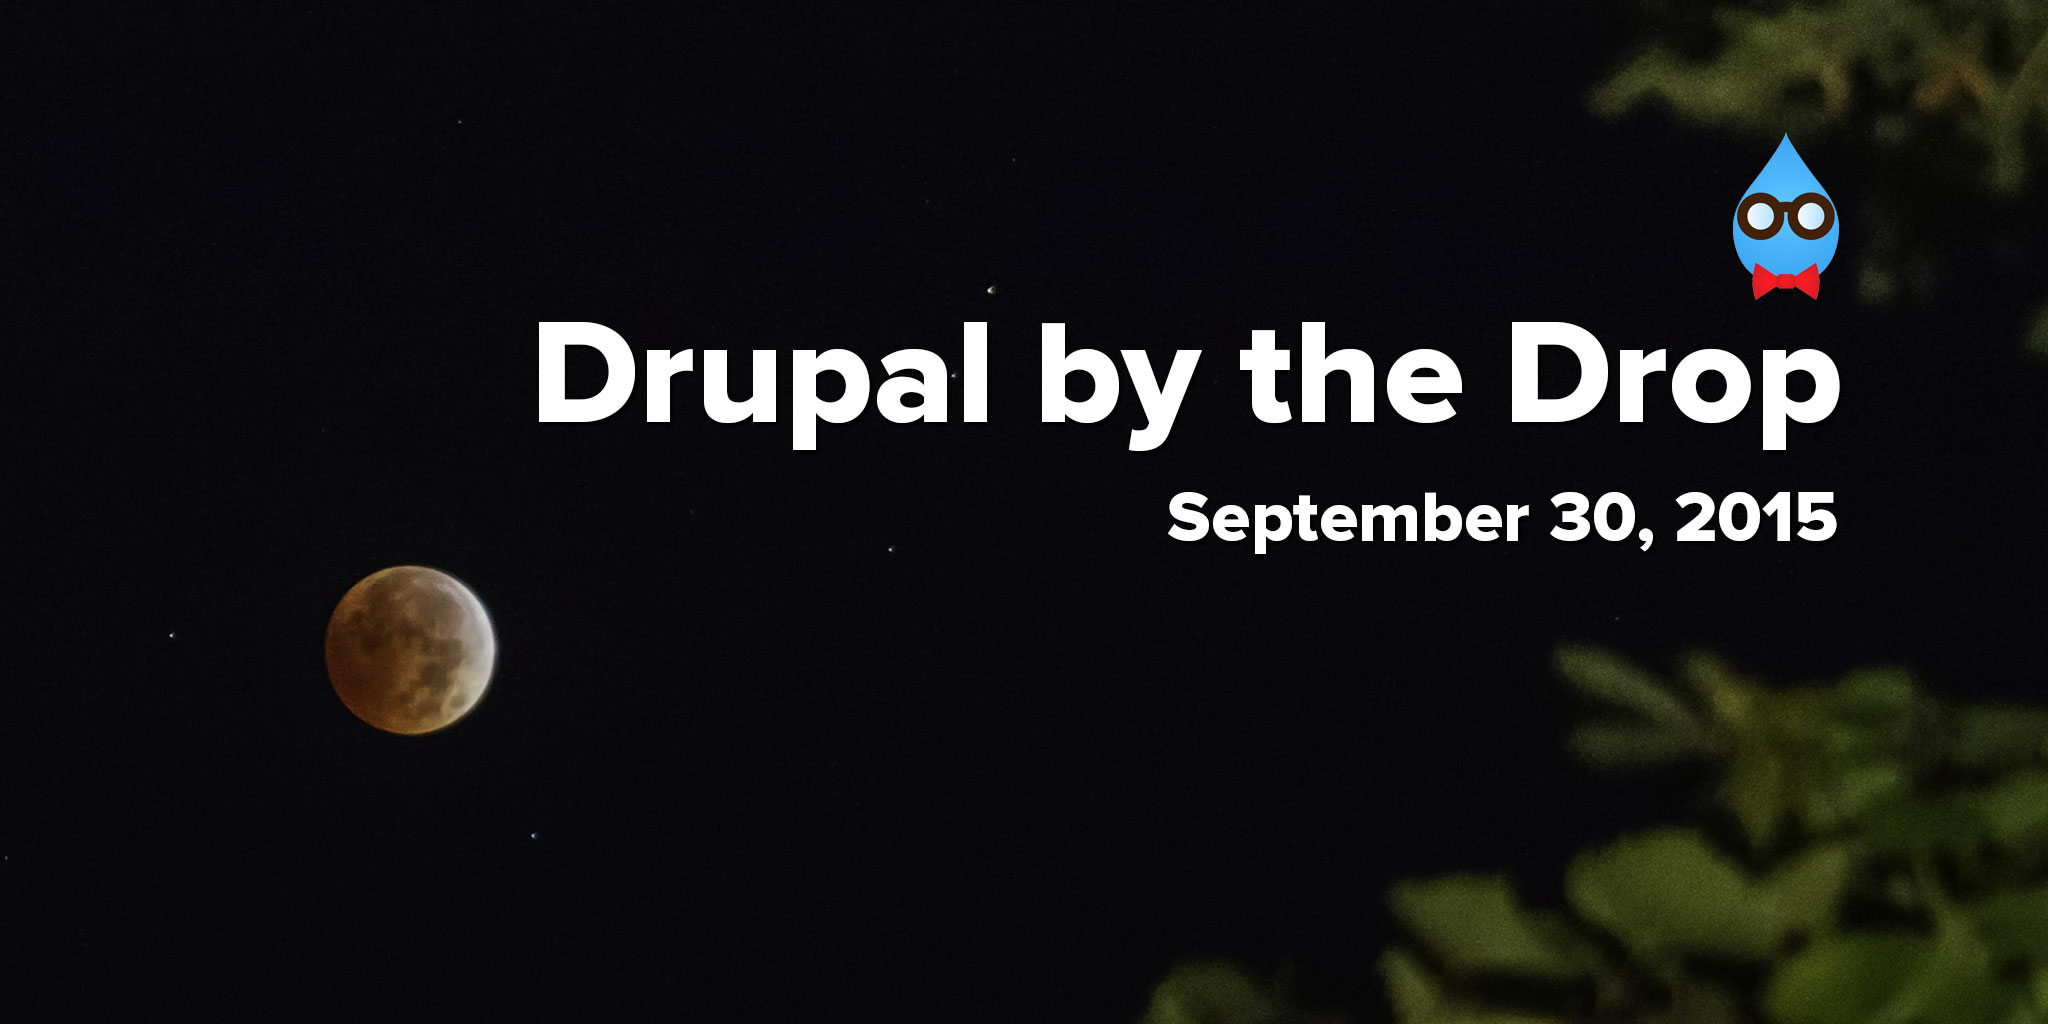 Drupal by the Drop: September 30, 2015